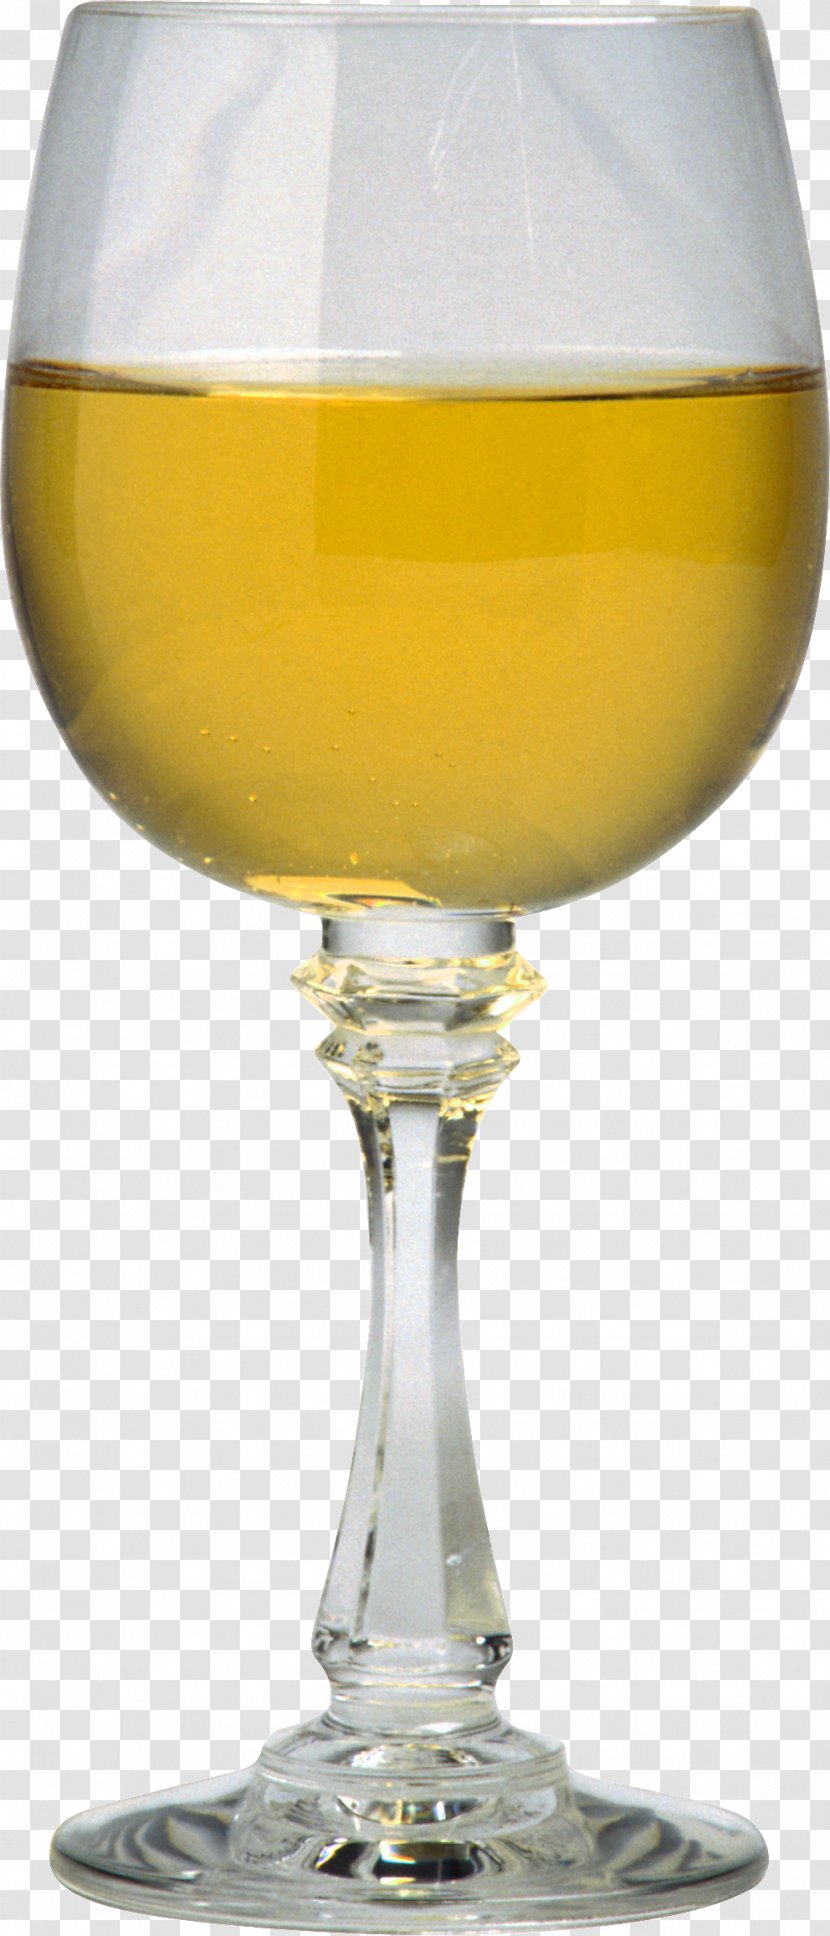 Wine Glass Champagne - Drink - Image Transparent PNG